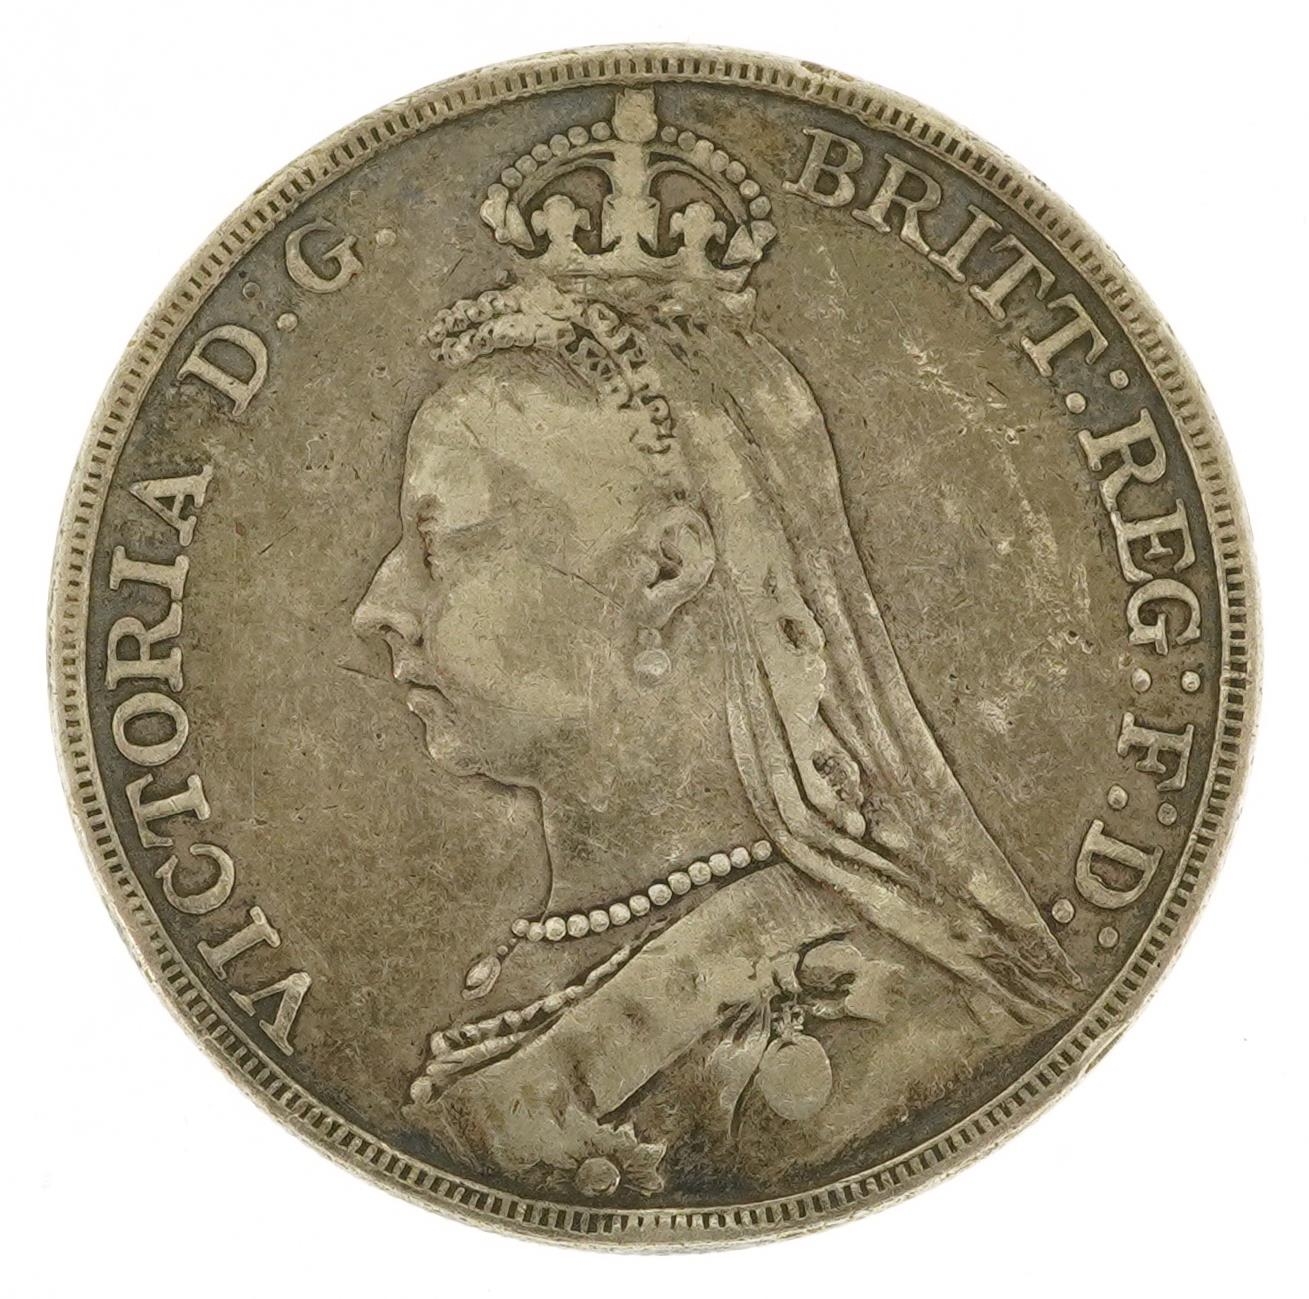 Queen Victoria 1891 crown : For further information on this lot please visit Eastbourneauction.com - Image 2 of 3